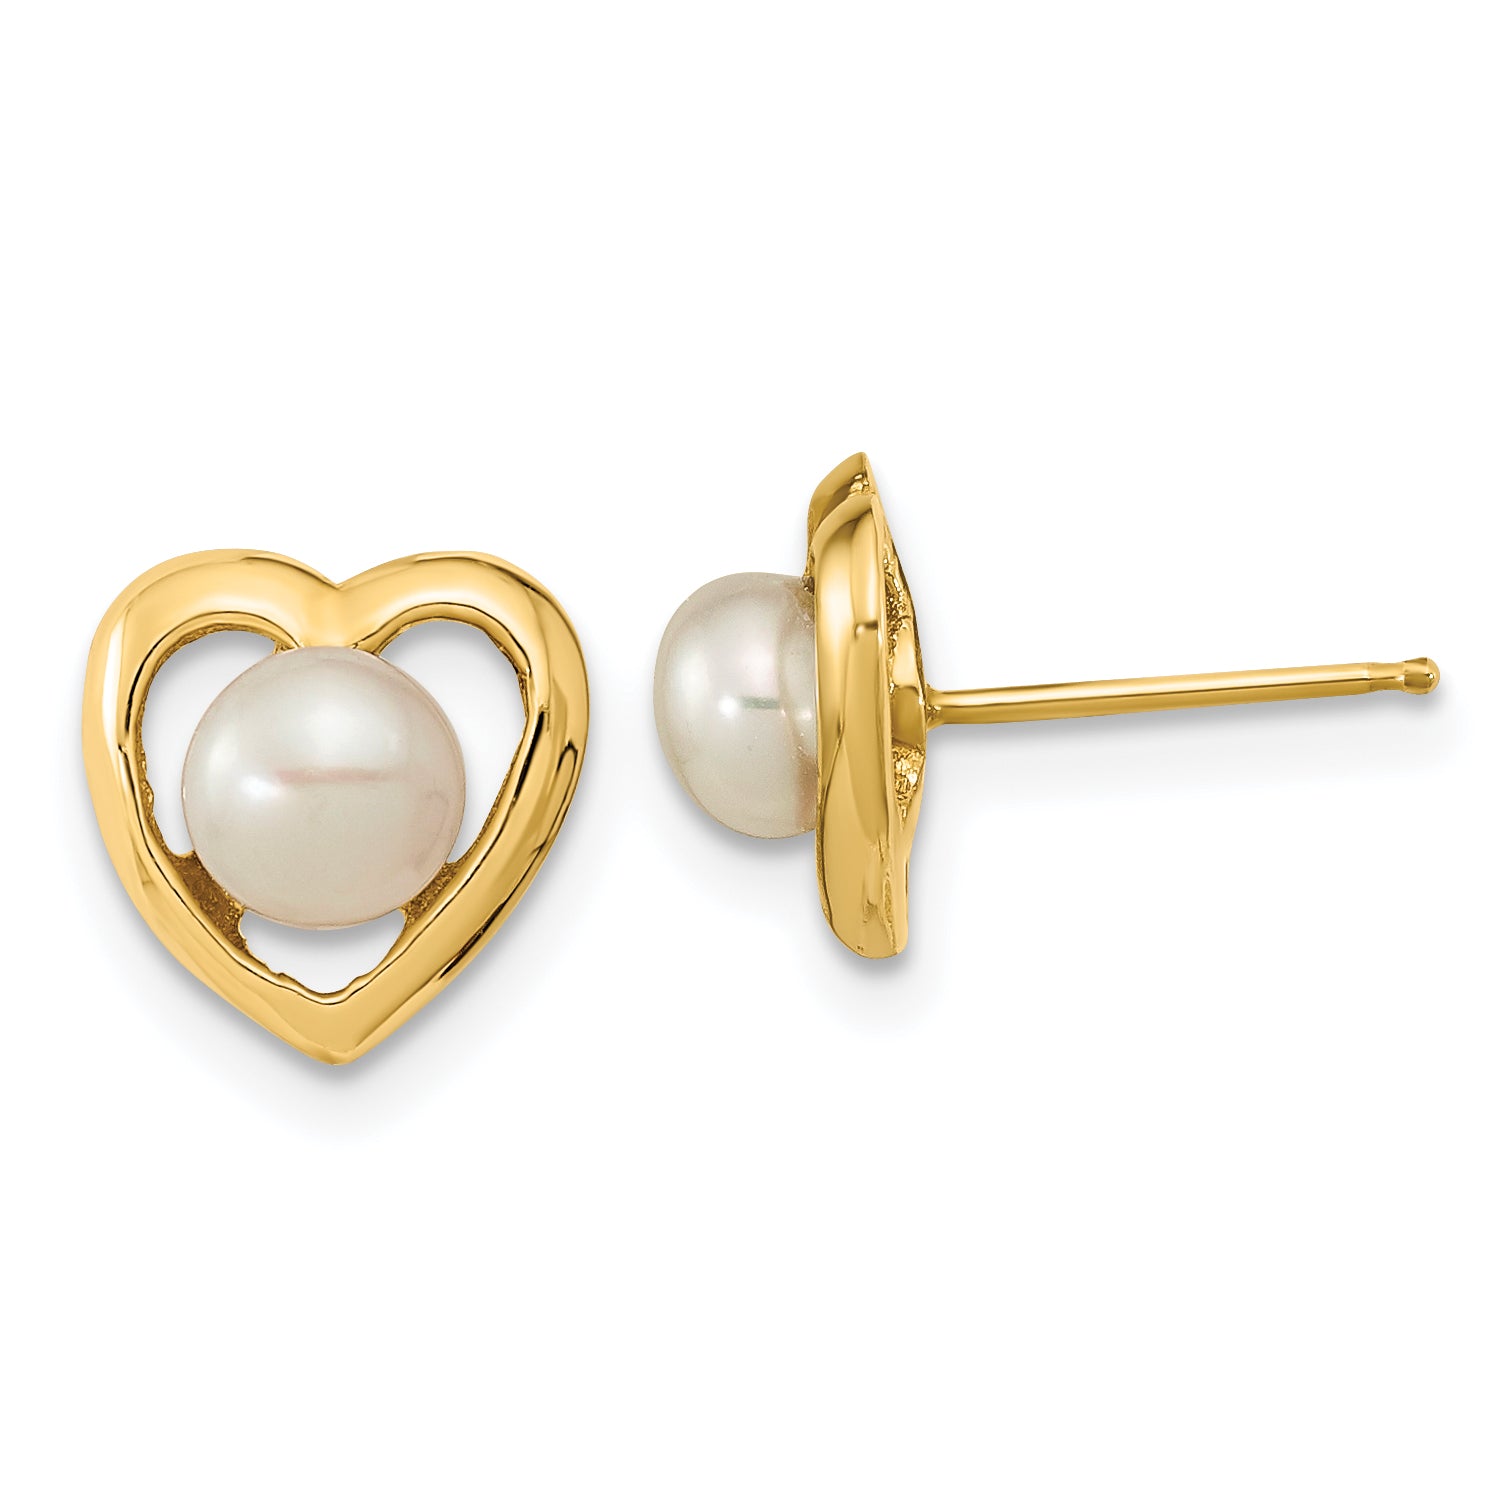 14k 4-5mm White Button Freshwater Cultured Pearl Post Earrings